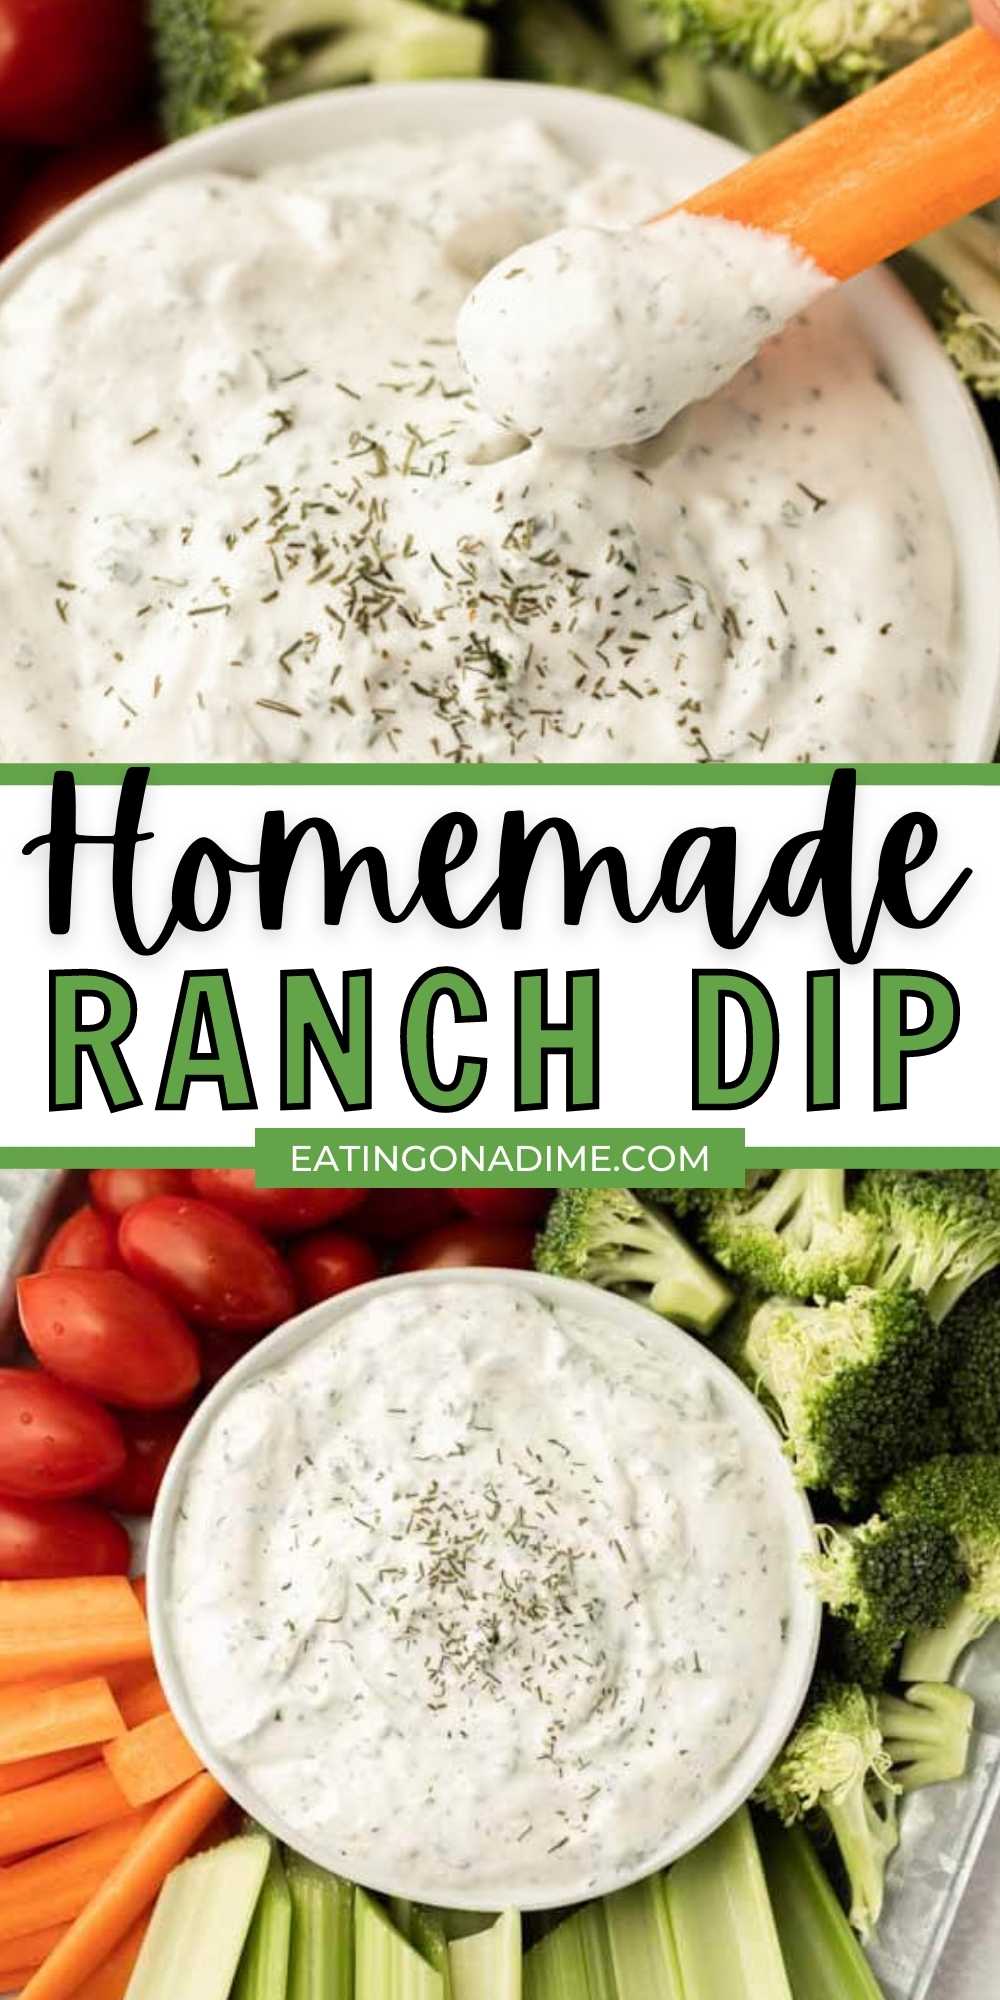 Homemade ranch dip - learn how to make ranch dip